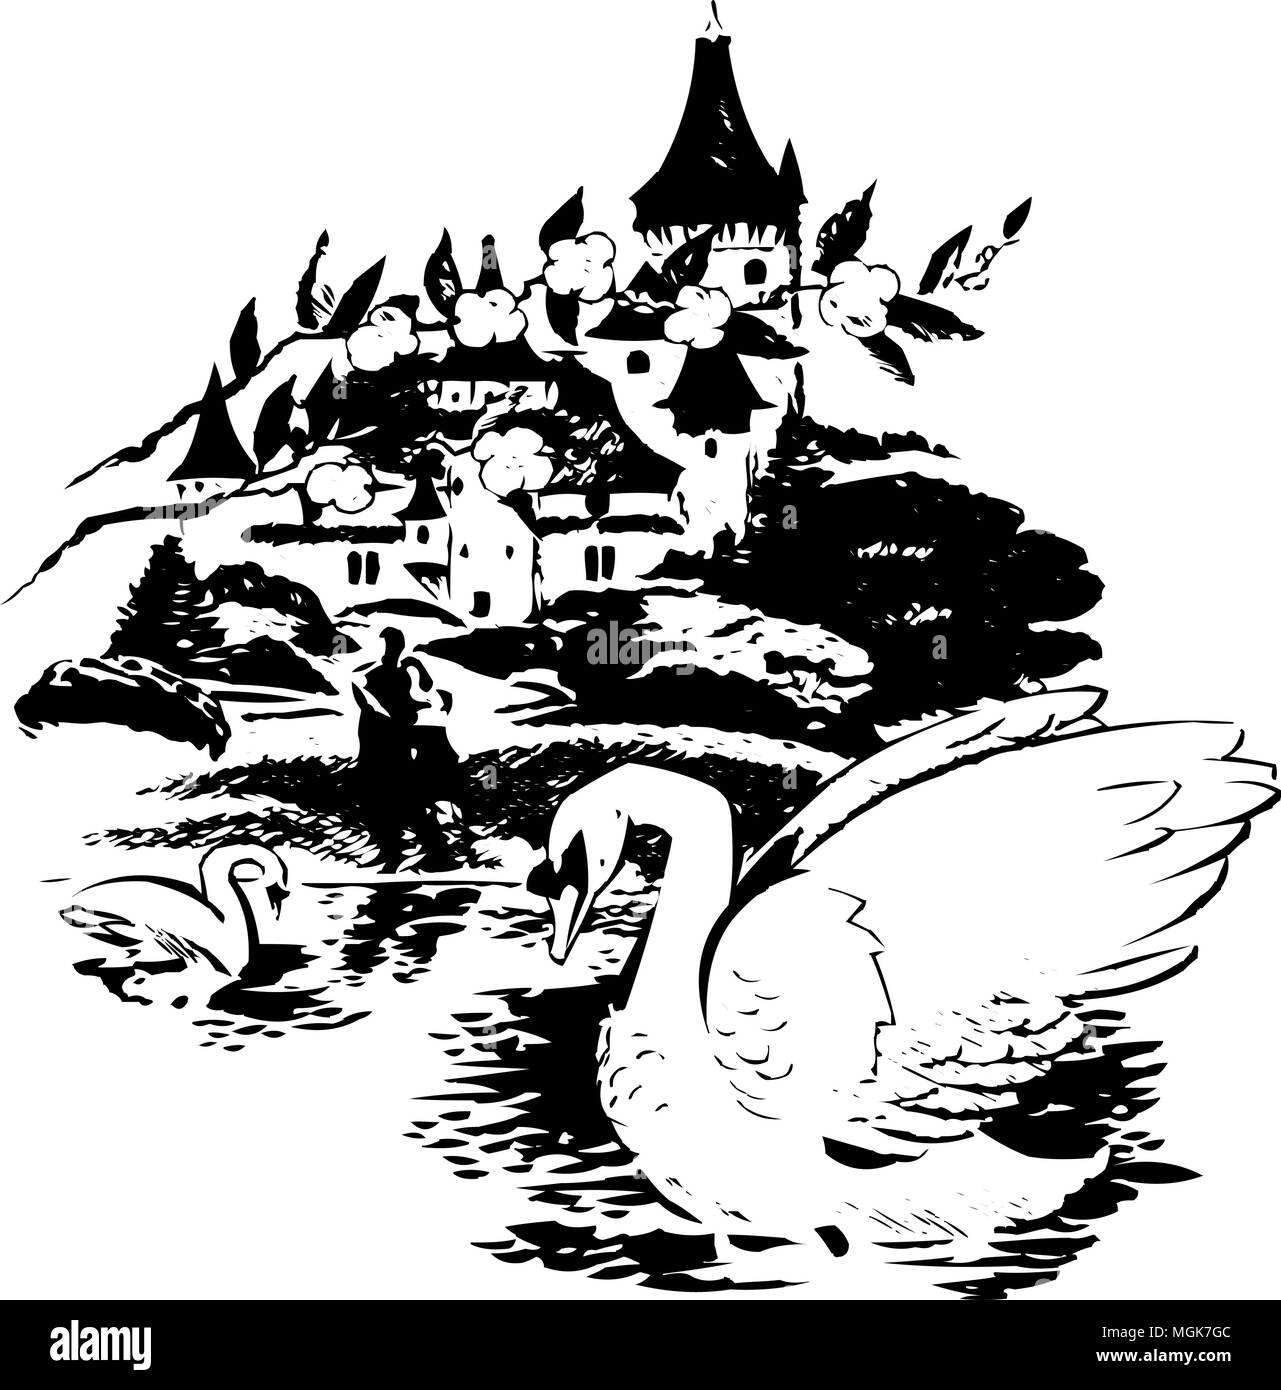 Swans In The Lake - Retro Clipart Illustration Stock Vector